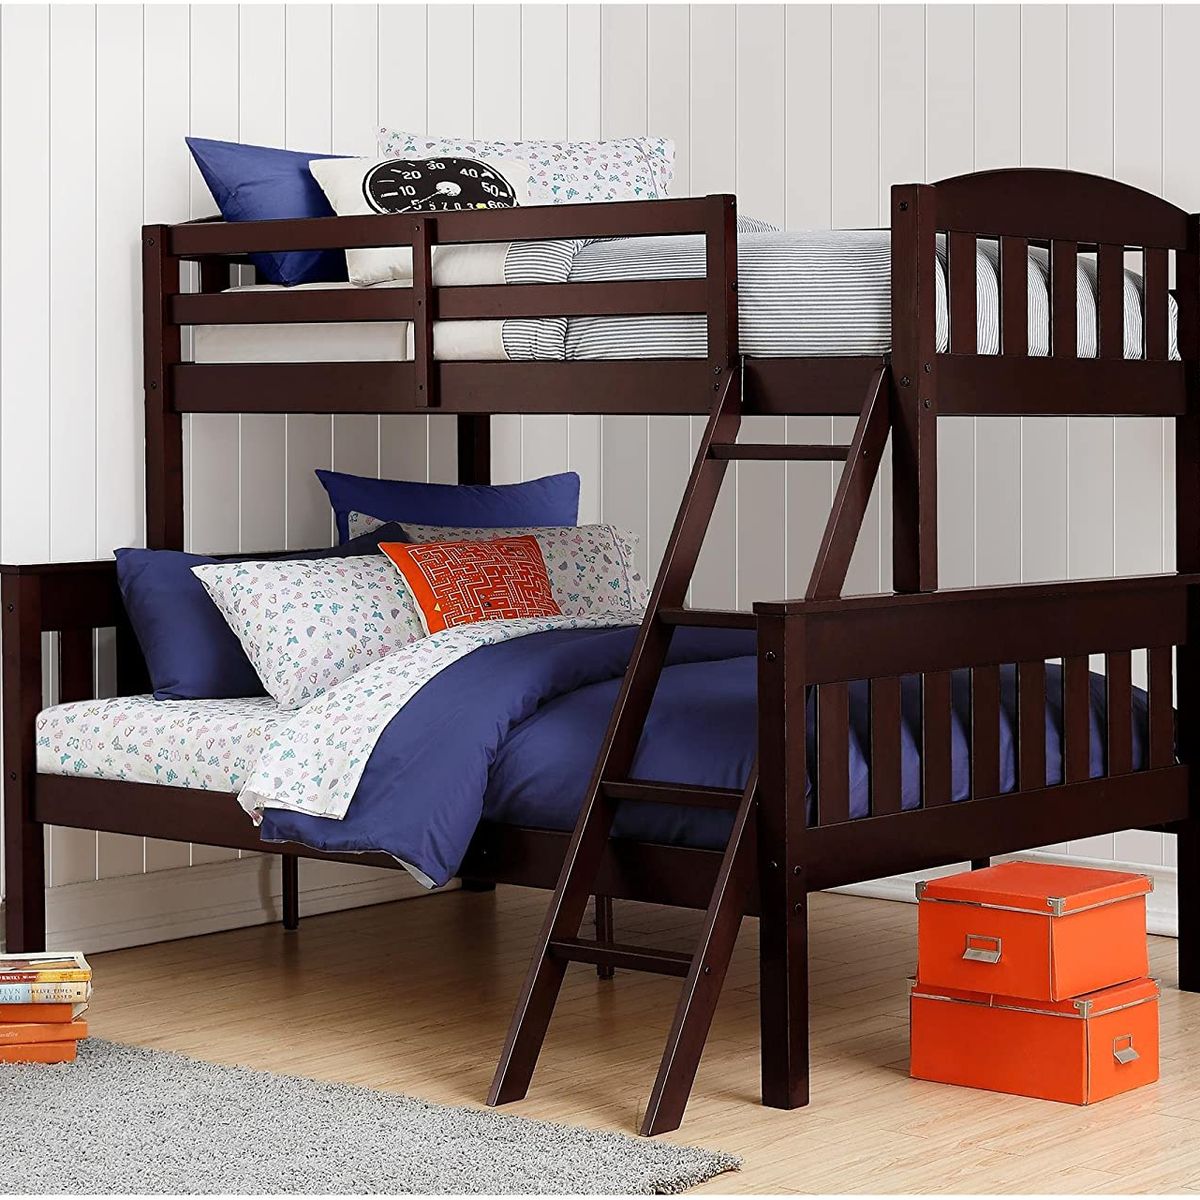 8 Best Bunk Beds 2022 The Strategist, Bunk Beds For Less Than 100000